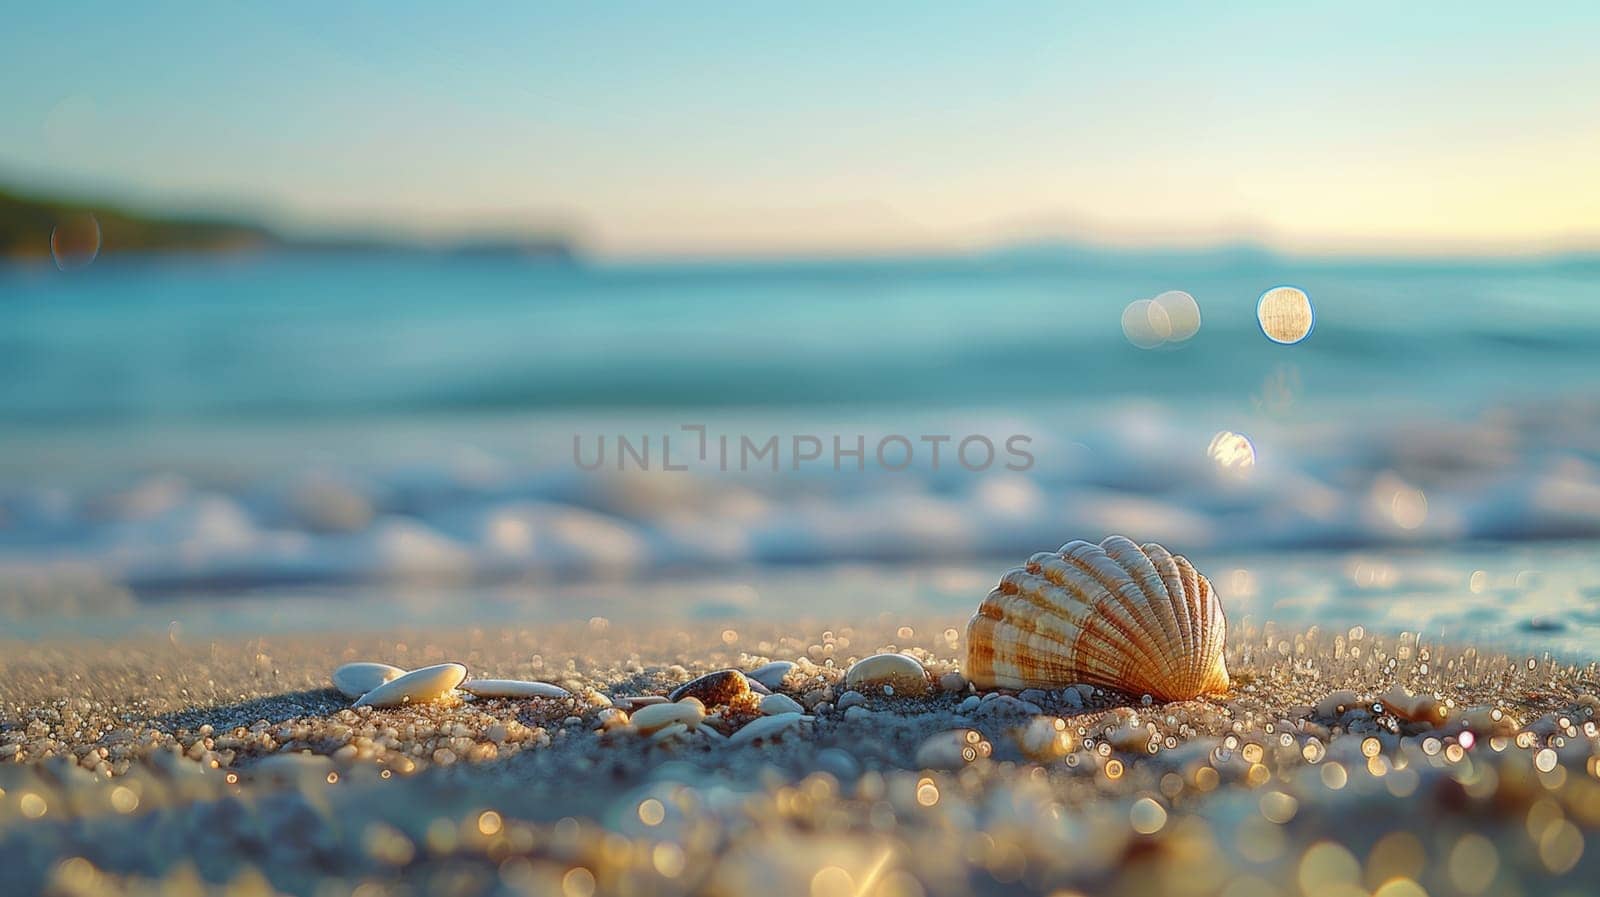 A close up of a seashell on the beach with water in front